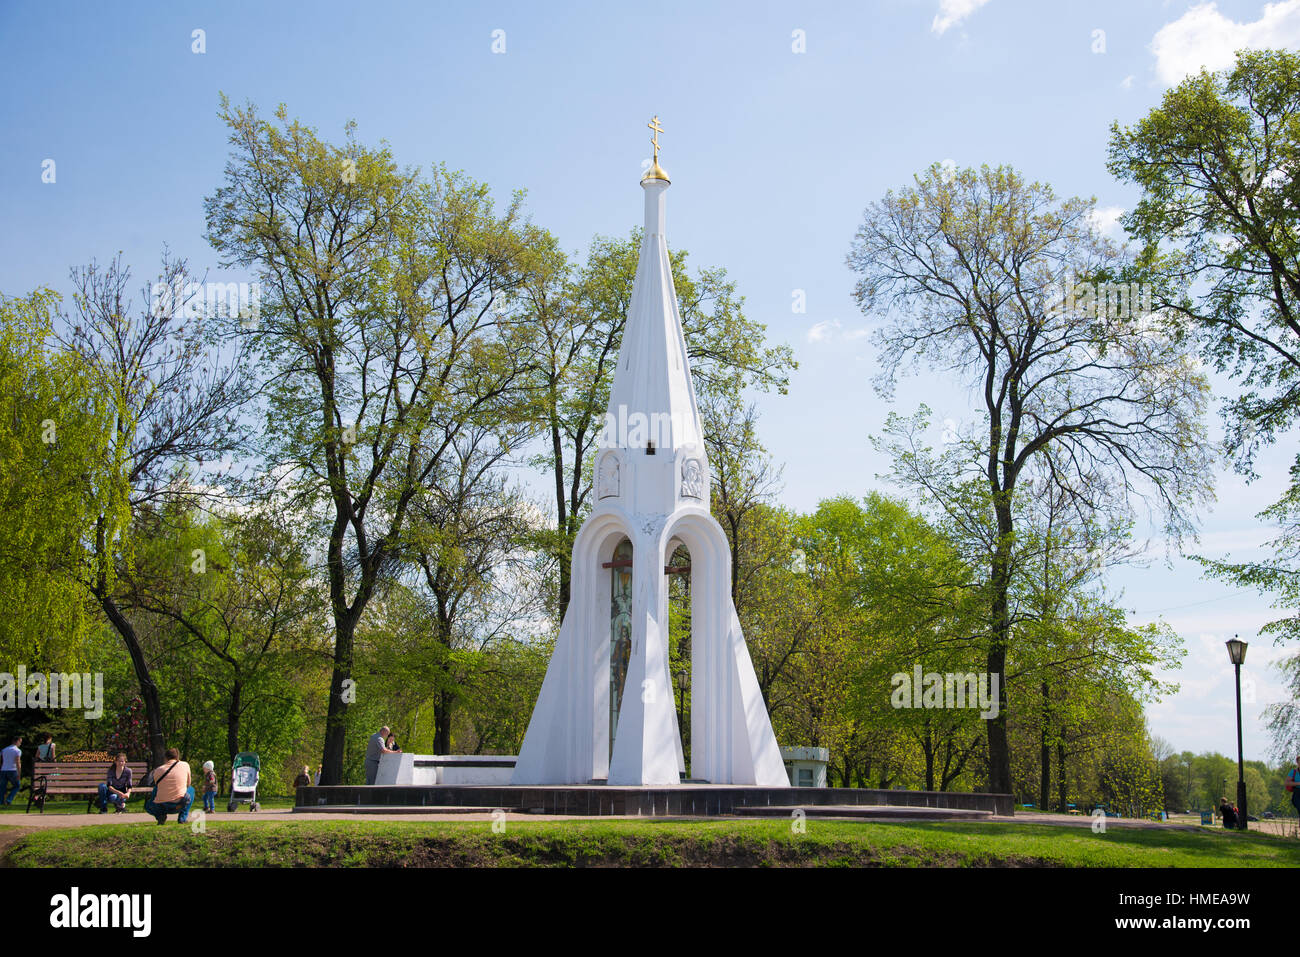 Yaroslavl, Russia - May 8, 2016: Chapel of Our Lady of Kazan - the construction of the missile in the form of a stained-glass wall, is depicted on the Stock Photo